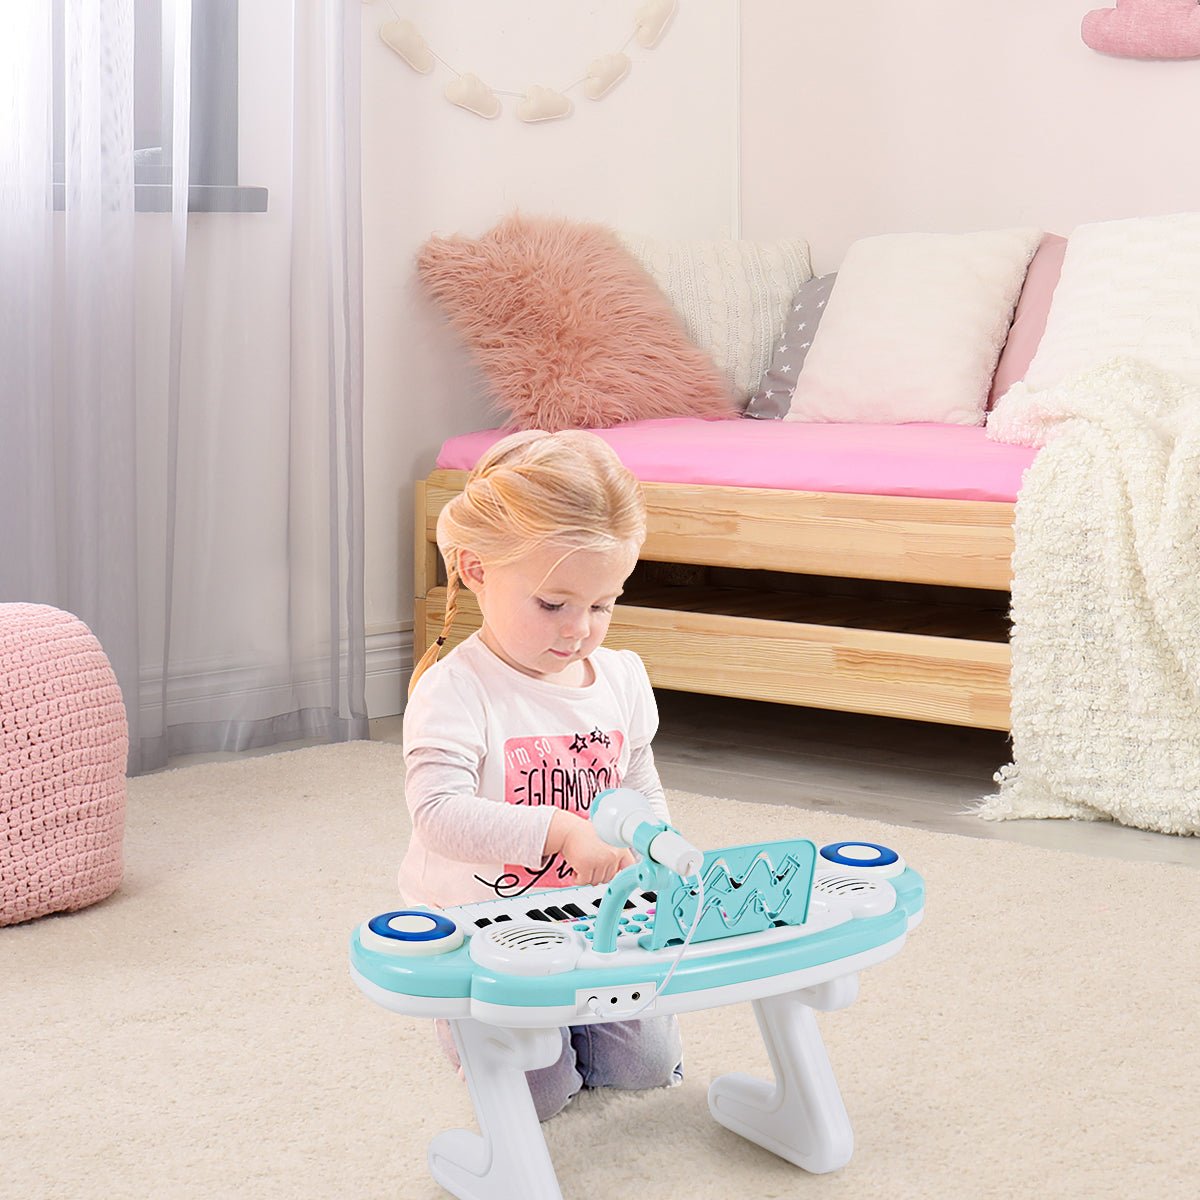 Buy the Kids Blue Keyboard Piano with Microphone at Kids Mega Mart